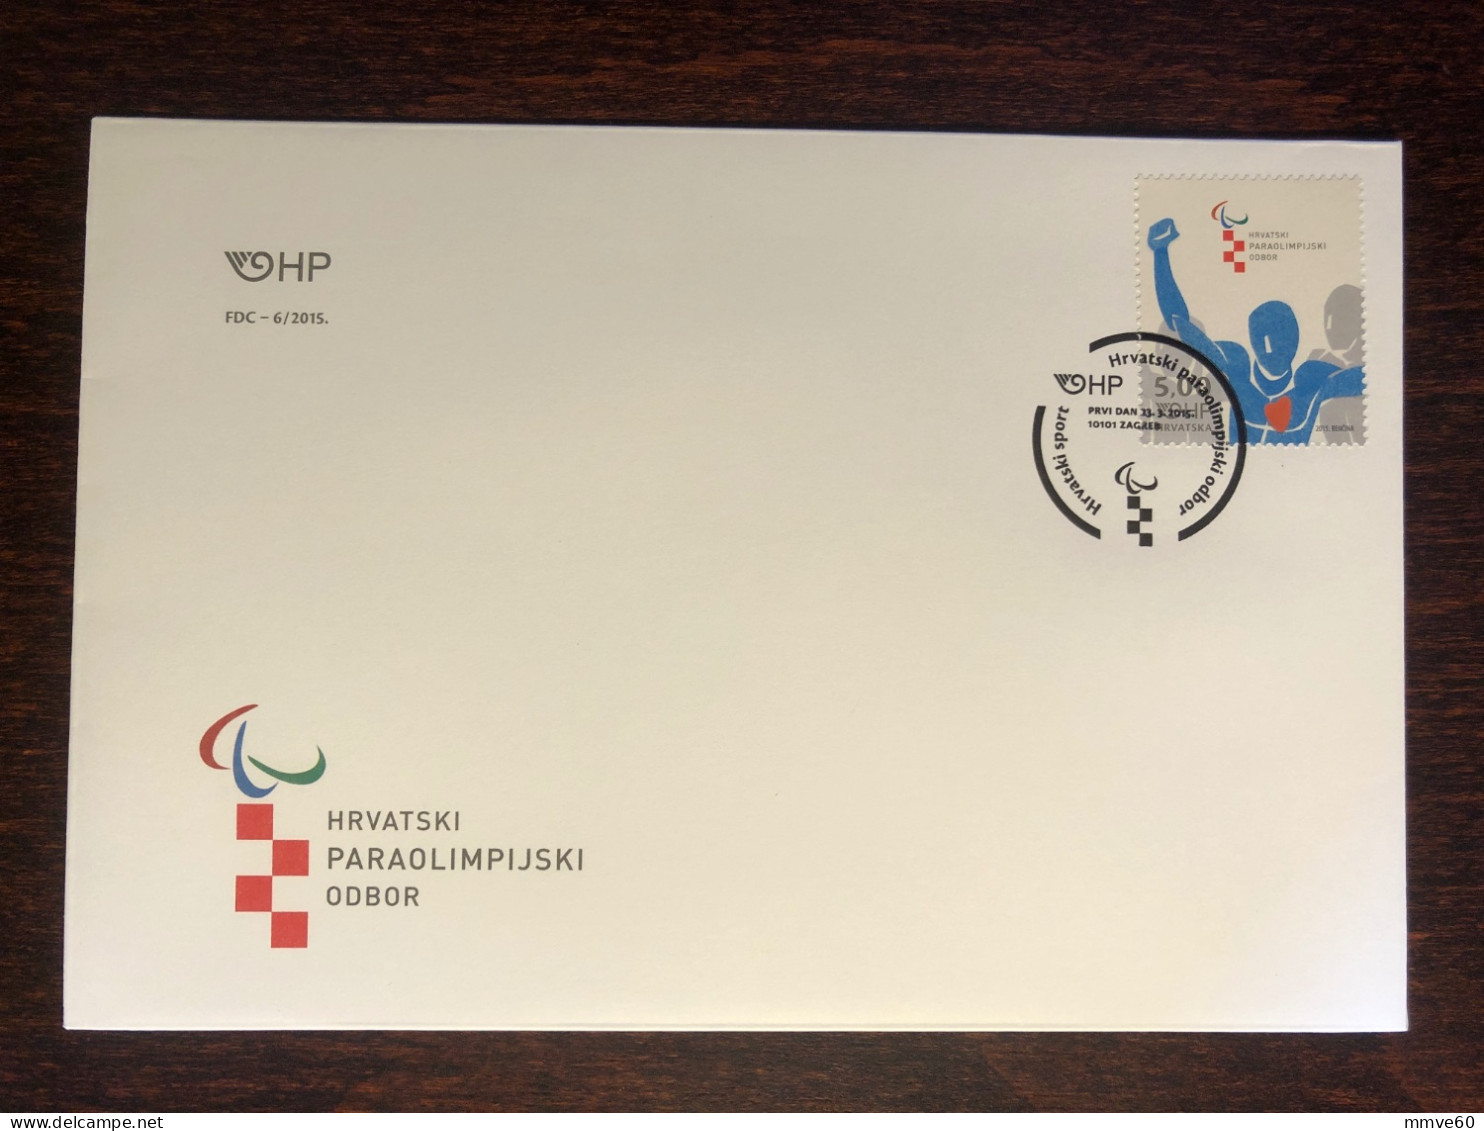 CROATIA FDC COVER 2015 YEAR PARALYMPIC DISABLED SPORTS HEALTH MEDICINE STAMPS - Croacia